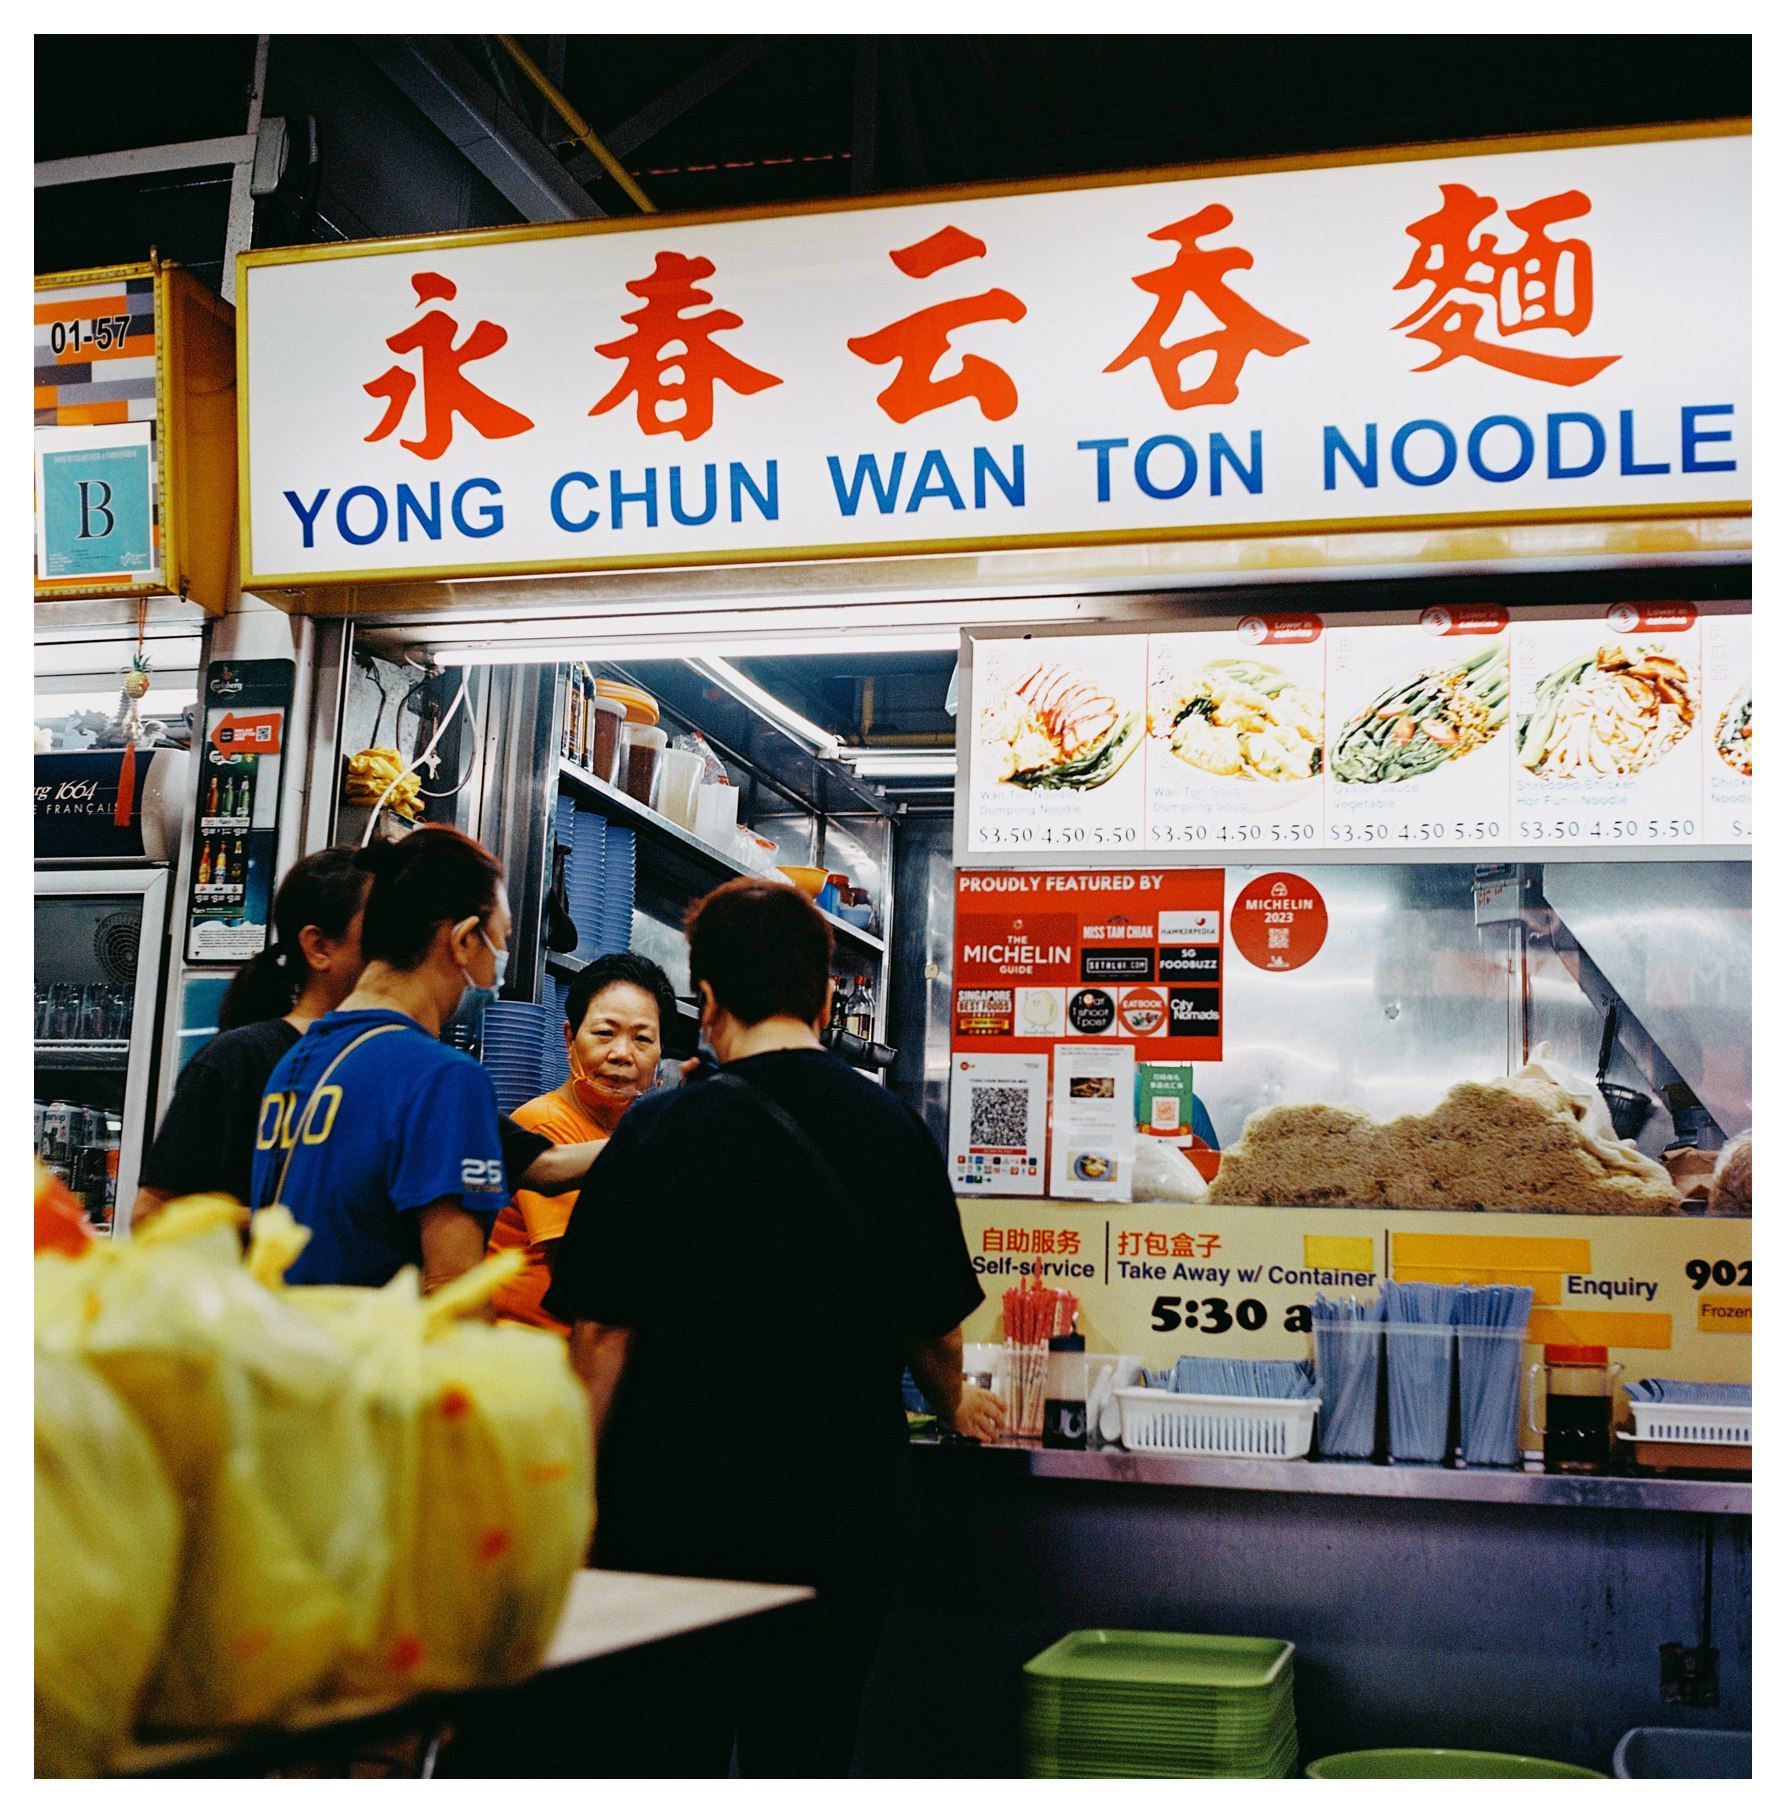 4. A scan of a medium format square color photo of a wanton noodle stall in Singapore that says Yong Chun wanton noodles